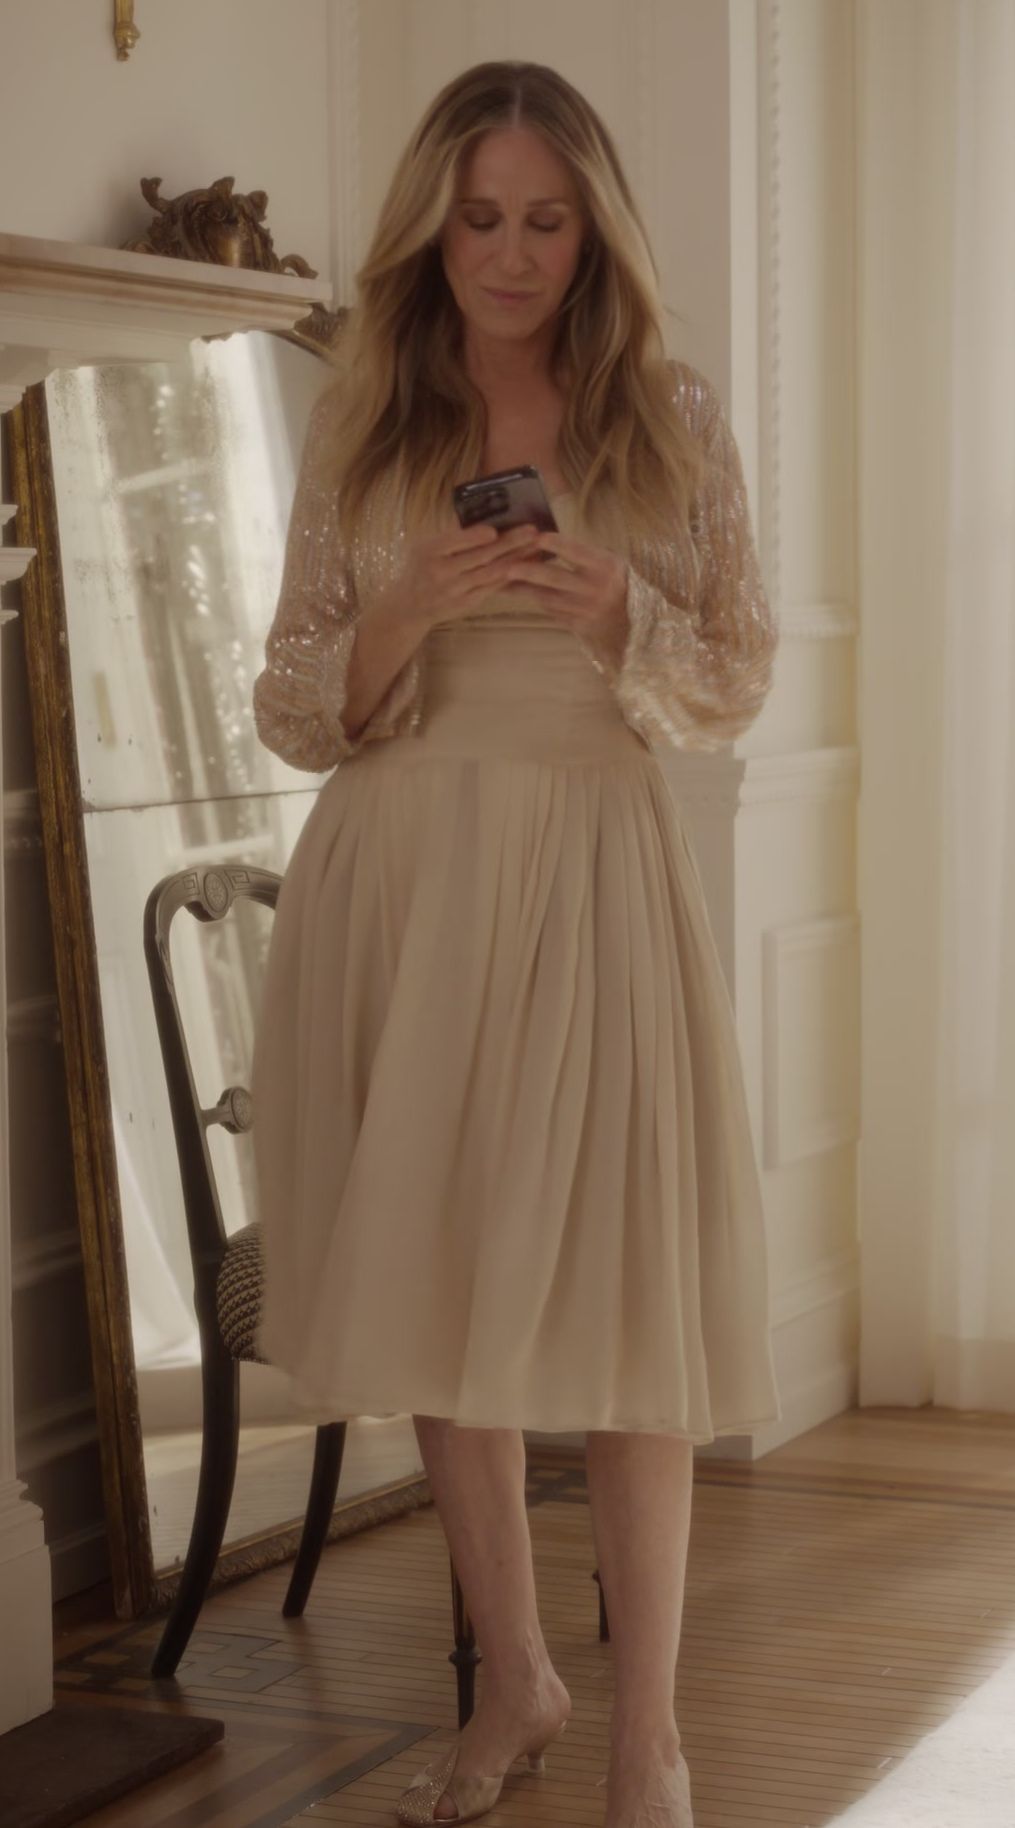 Worn on And Just Like That... TV Show - Champagne Midi Dress Worn by of Sarah Jessica Parker as Carrie Bradshaw